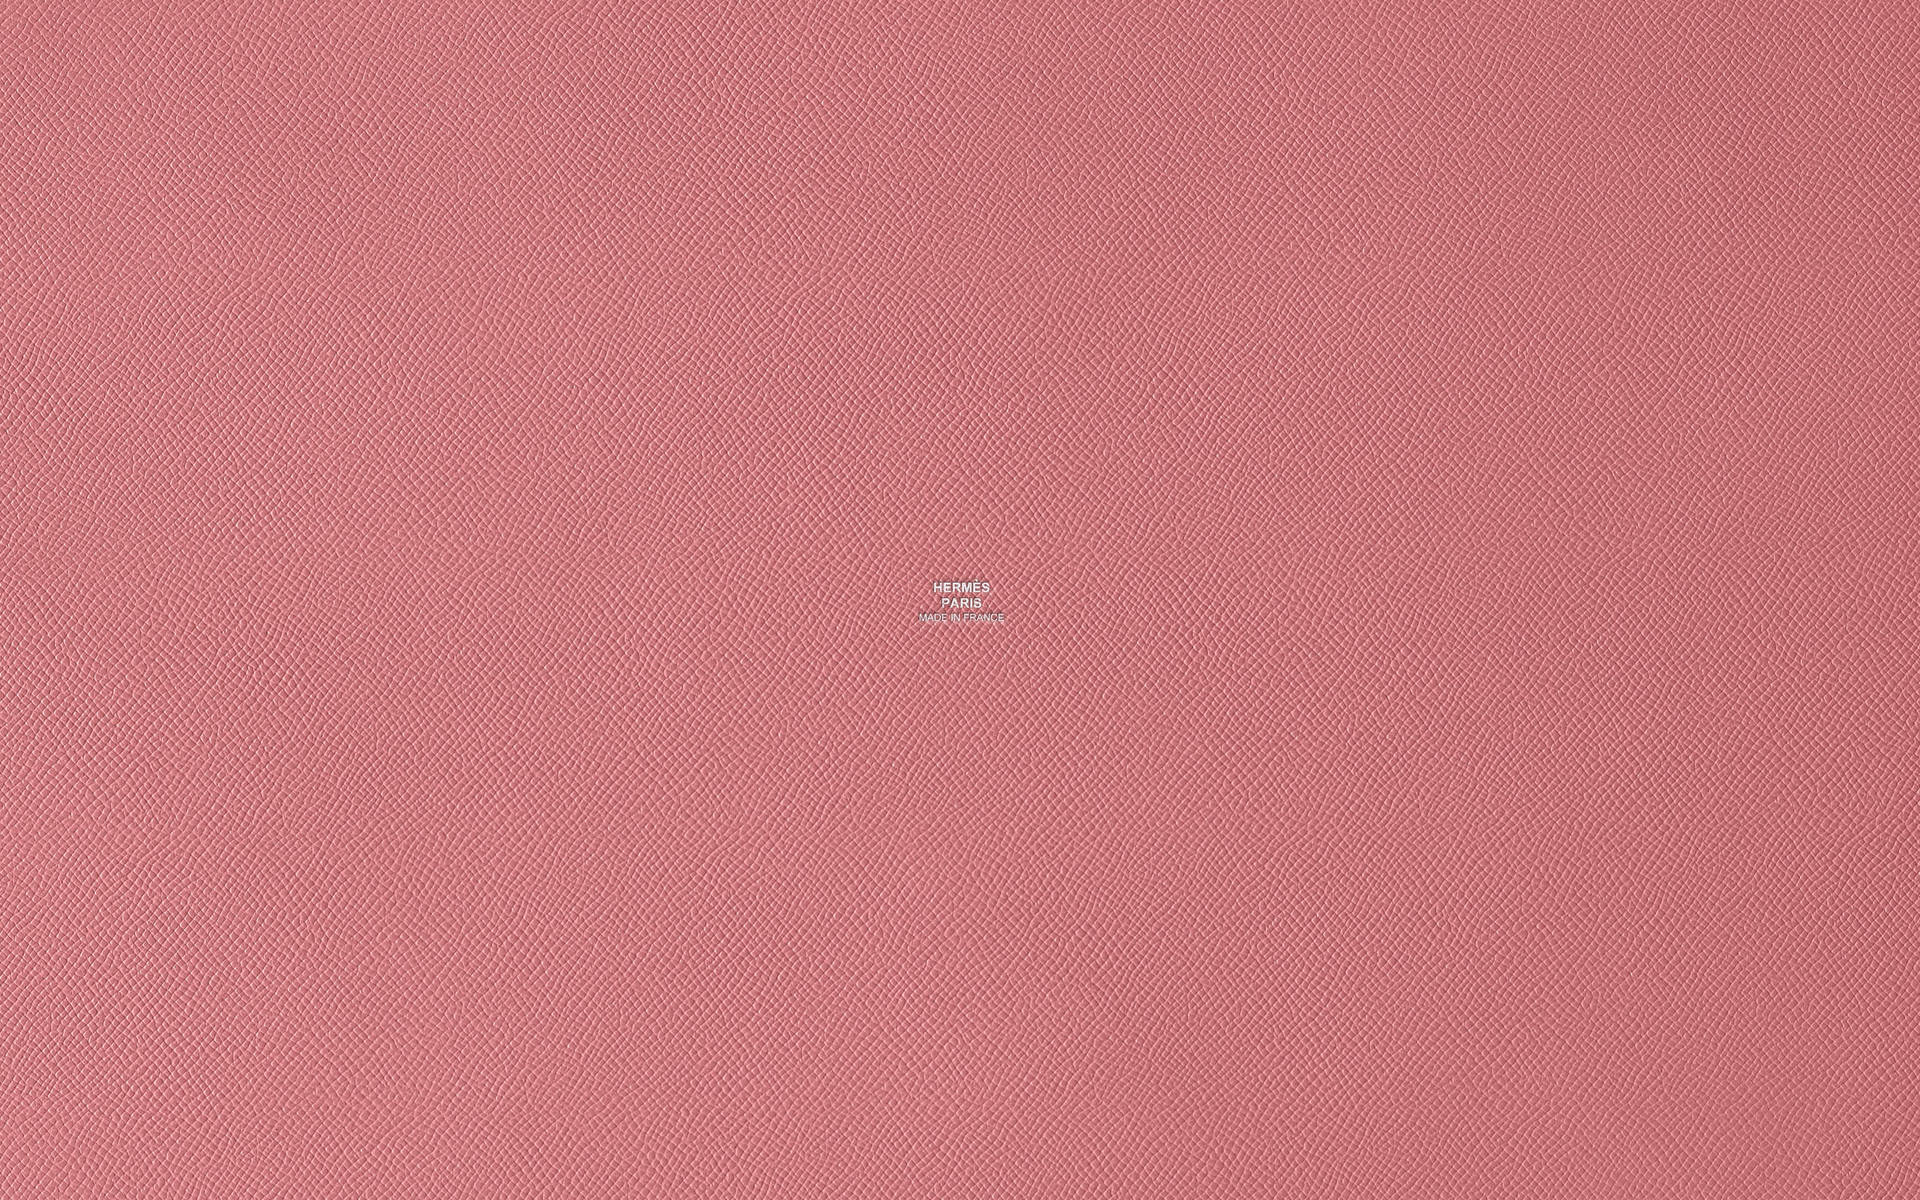 Salmon Pink Textured Hermes Background